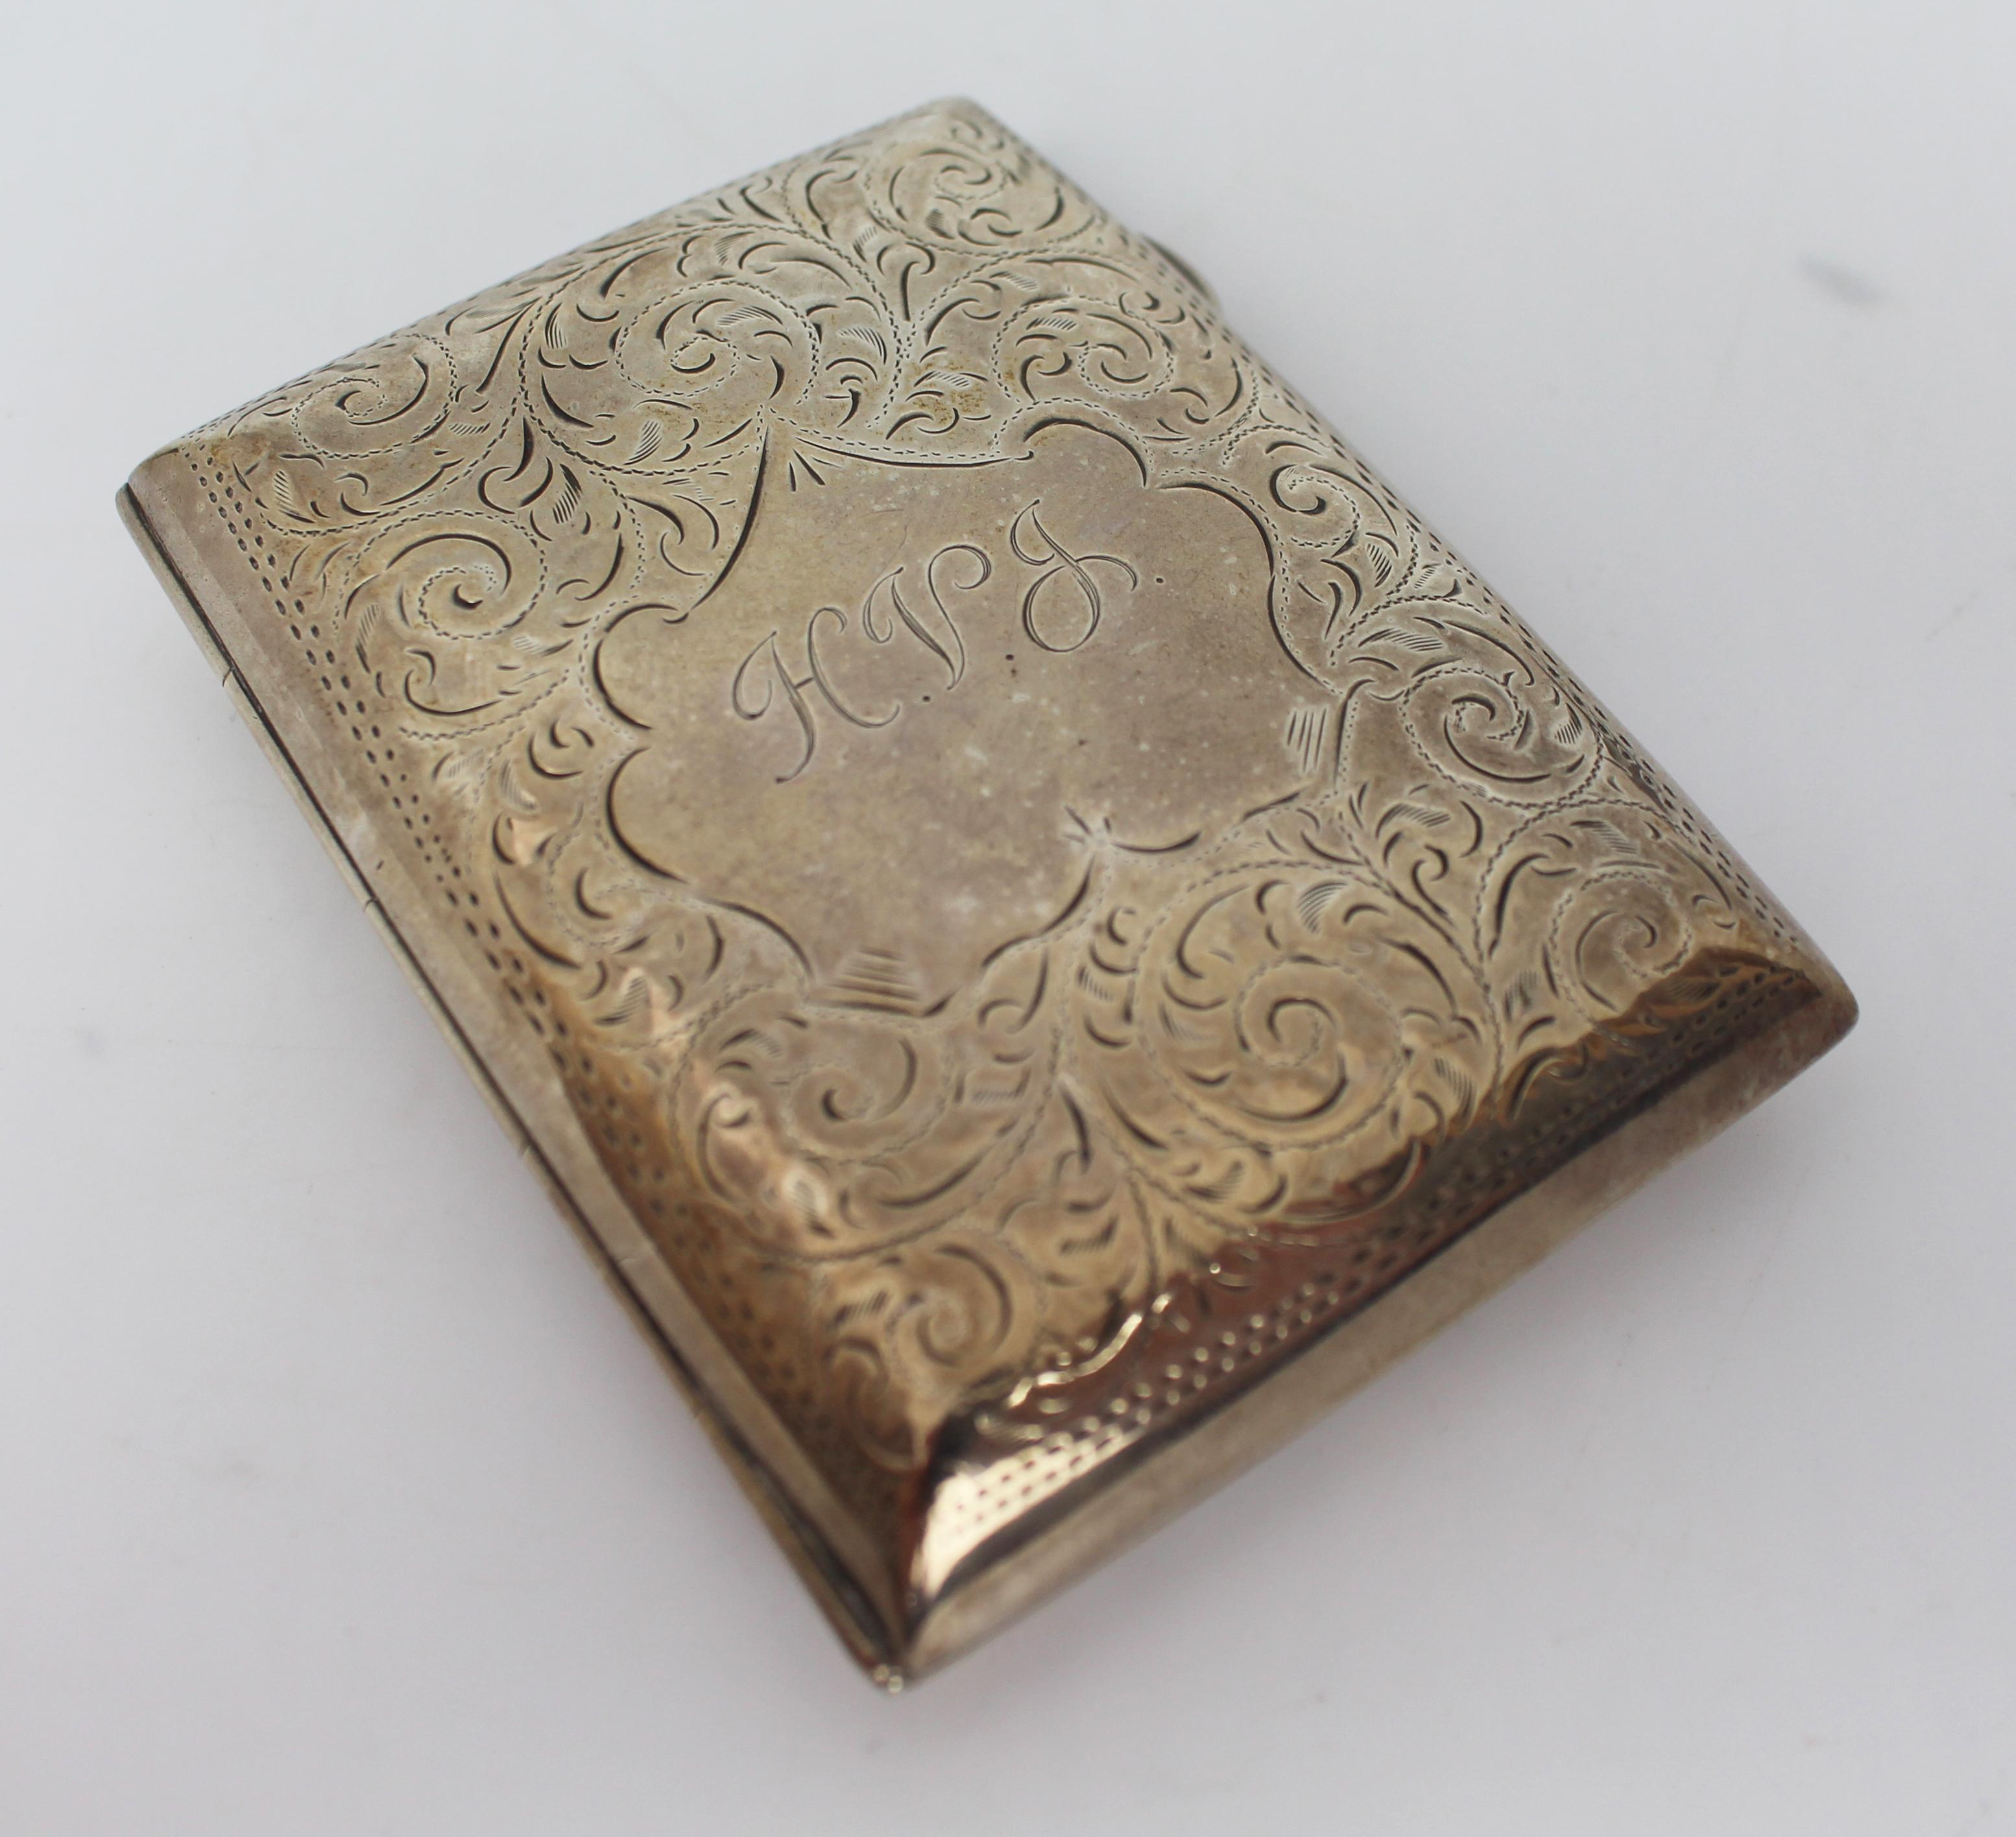 Edwardian solid silver cigarette case by Joseph Gloster.


Edwardian, English

Fully hallmarked; Joseph Gloster Ltd, Birmingham, 1906

Solid silver, silver gilt inside

Measures 6 x 8 x 1.5 cm

Weight: 58.9 g

Good condition. Minor